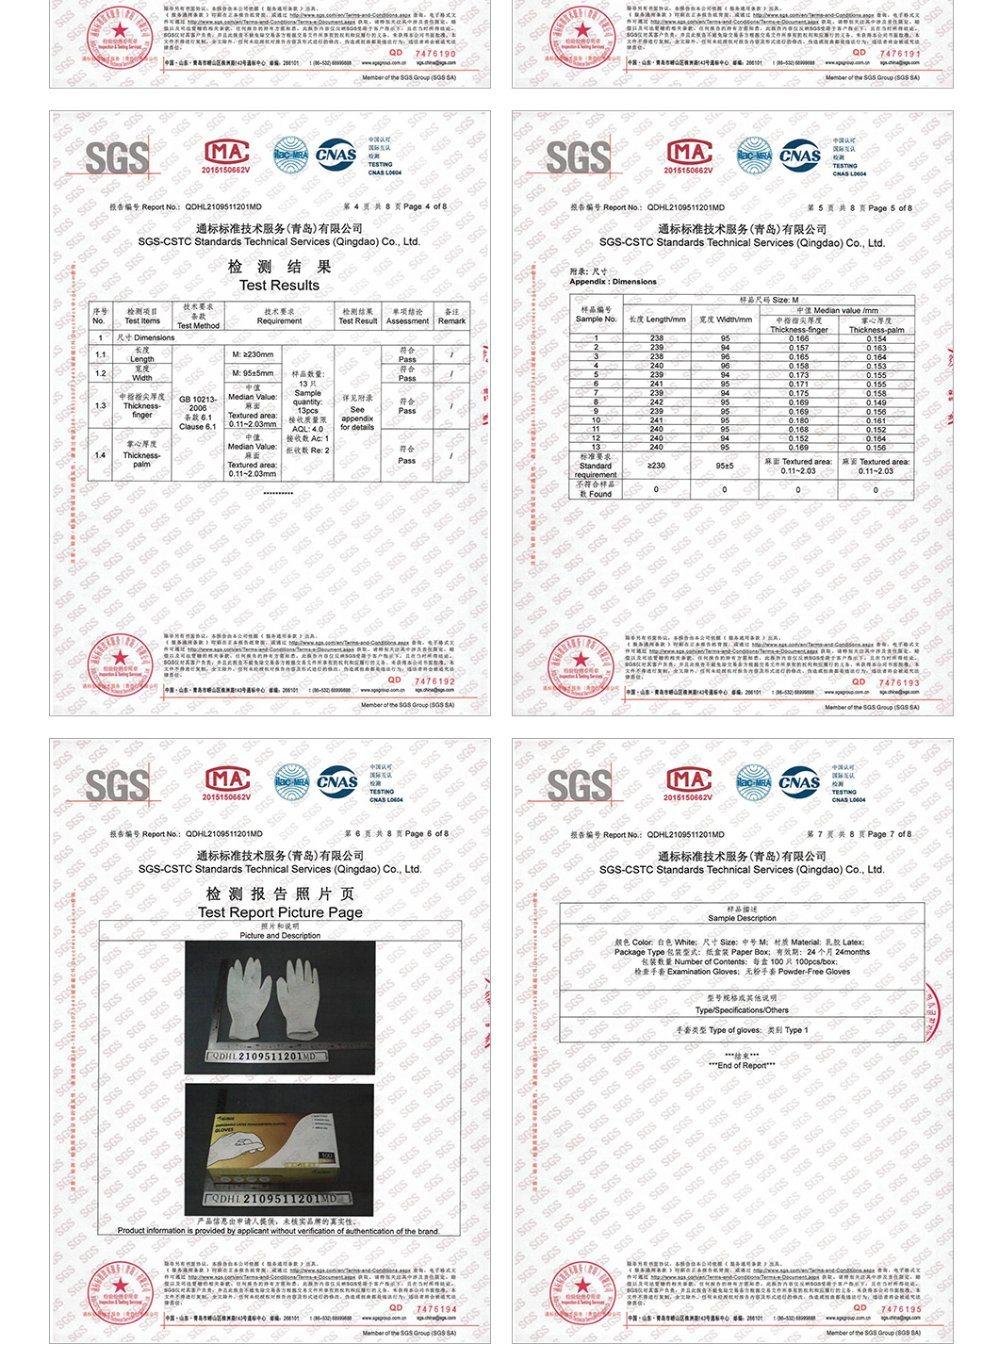 High Performance Disposable Medical Examination Gloves, Food Service Gloves Rubber Gloves